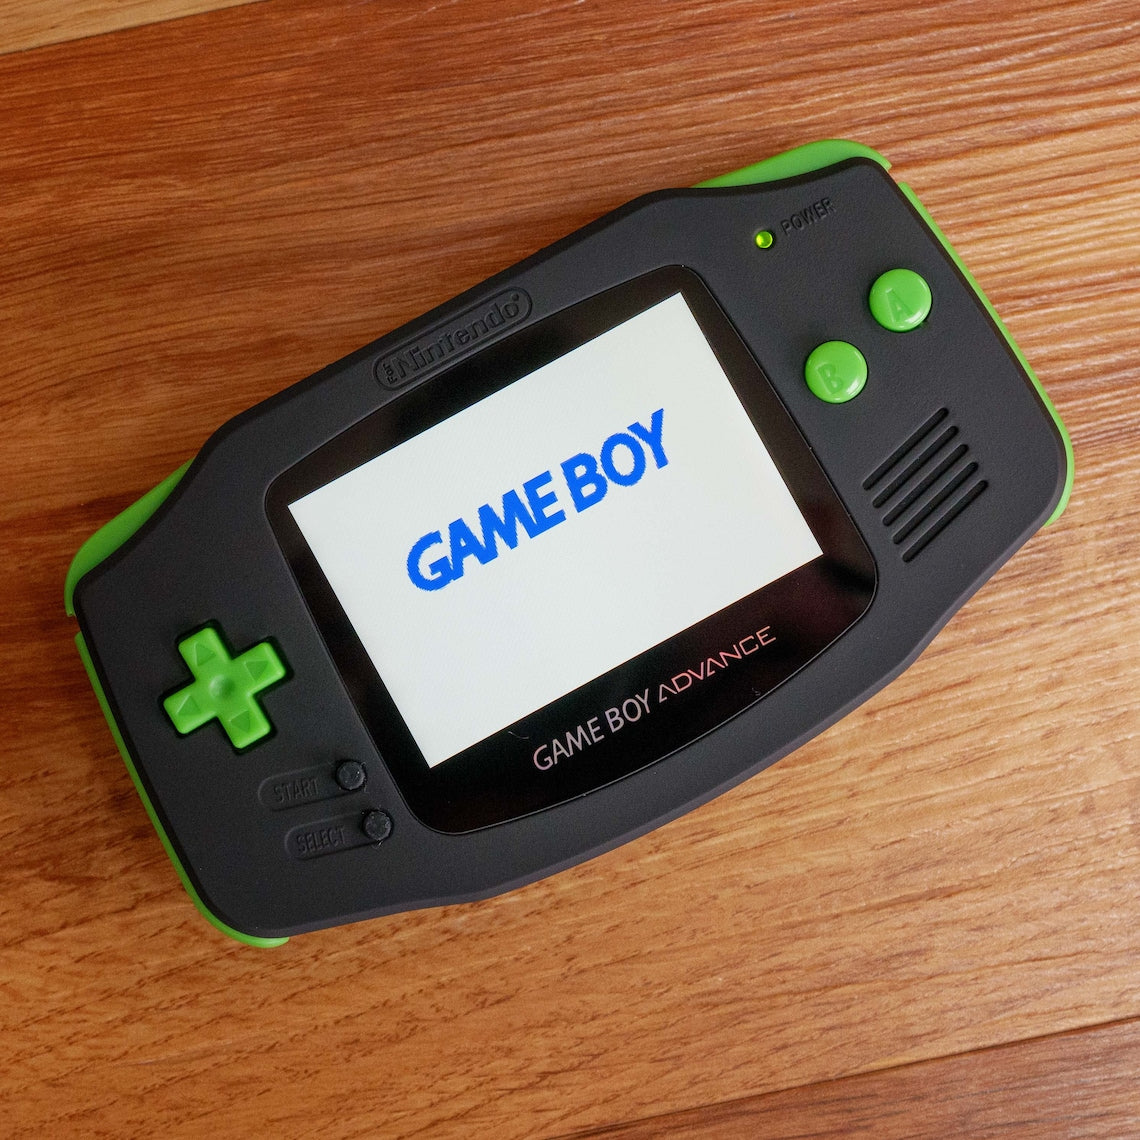 Custom Modded Gameboy Advance Black and Green Console With Backlit Screen (Gameboy Advance)